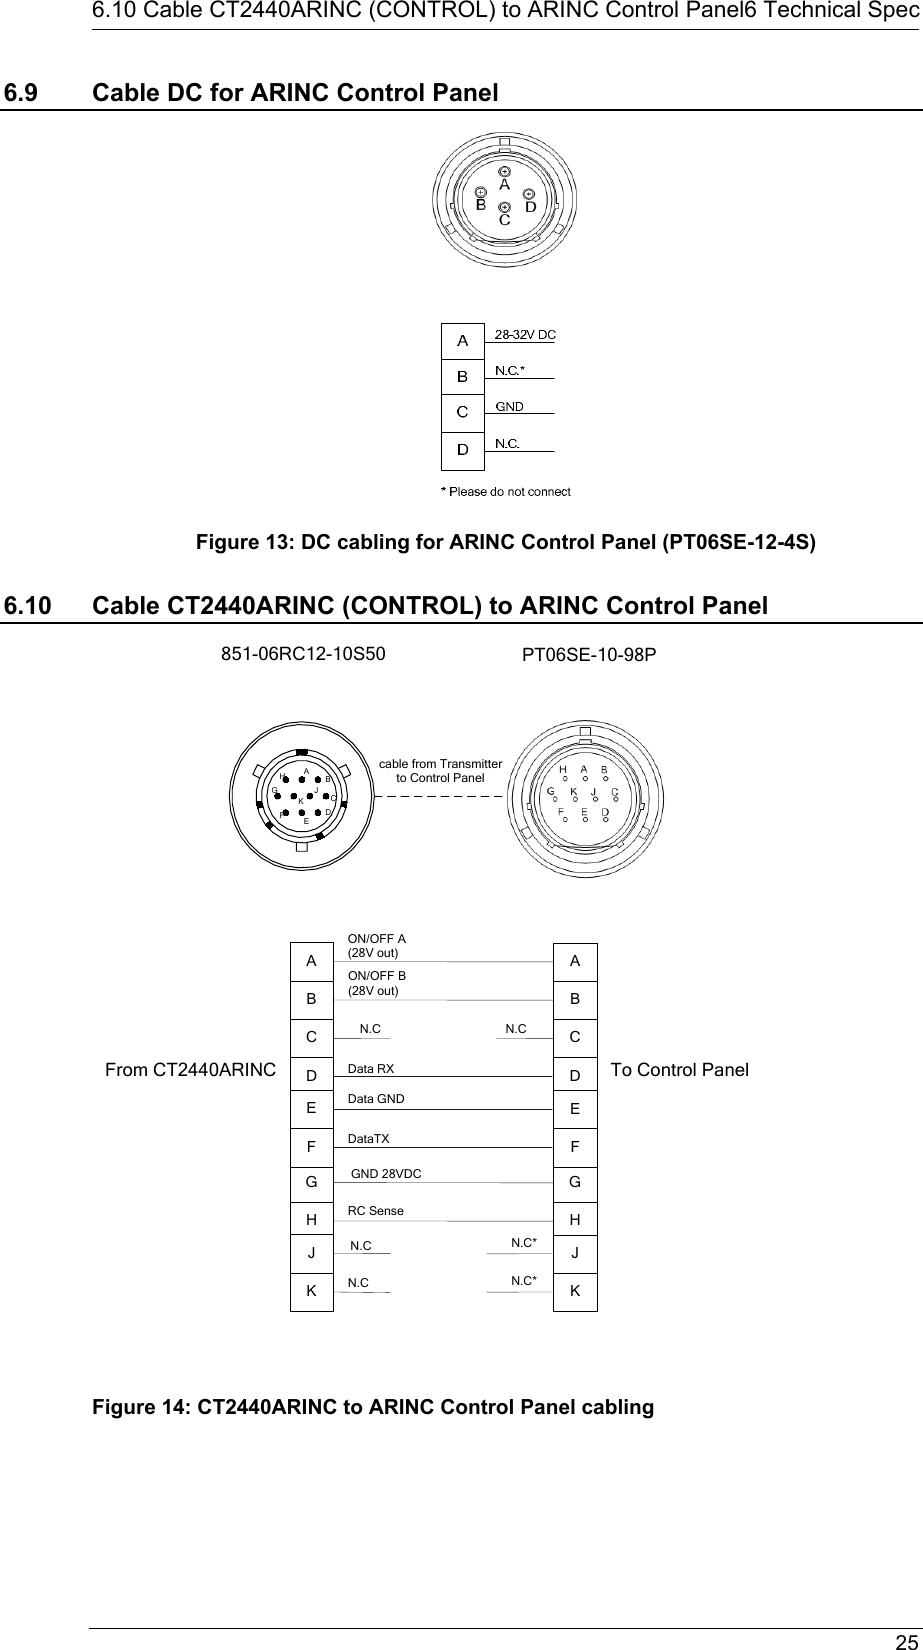  25  6.10 Cable CT2440ARINC (CONTROL) to ARINC Control Panel6 Technical Spec6.9  Cable DC for ARINC Control Panel  Figure 13: DC cabling for ARINC Control Panel (PT06SE-12-4S) 6.10 Cable CT2440ARINC (CONTROL) to ARINC Control Panel GHJKTo Control PanelCDEFABData RXData GNDDataTX GND 28VDCN.CN.CN.C*N.C*From CT2440ARINCON/OFF A (28V out)PT06SE-10-98P851-06RC12-10S50ABCDEFGHJKcable from Transmitter to Control PanelGHJKCDEFABON/OFF B (28V out)N.C N.CRC Sense Figure 14: CT2440ARINC to ARINC Control Panel cabling      